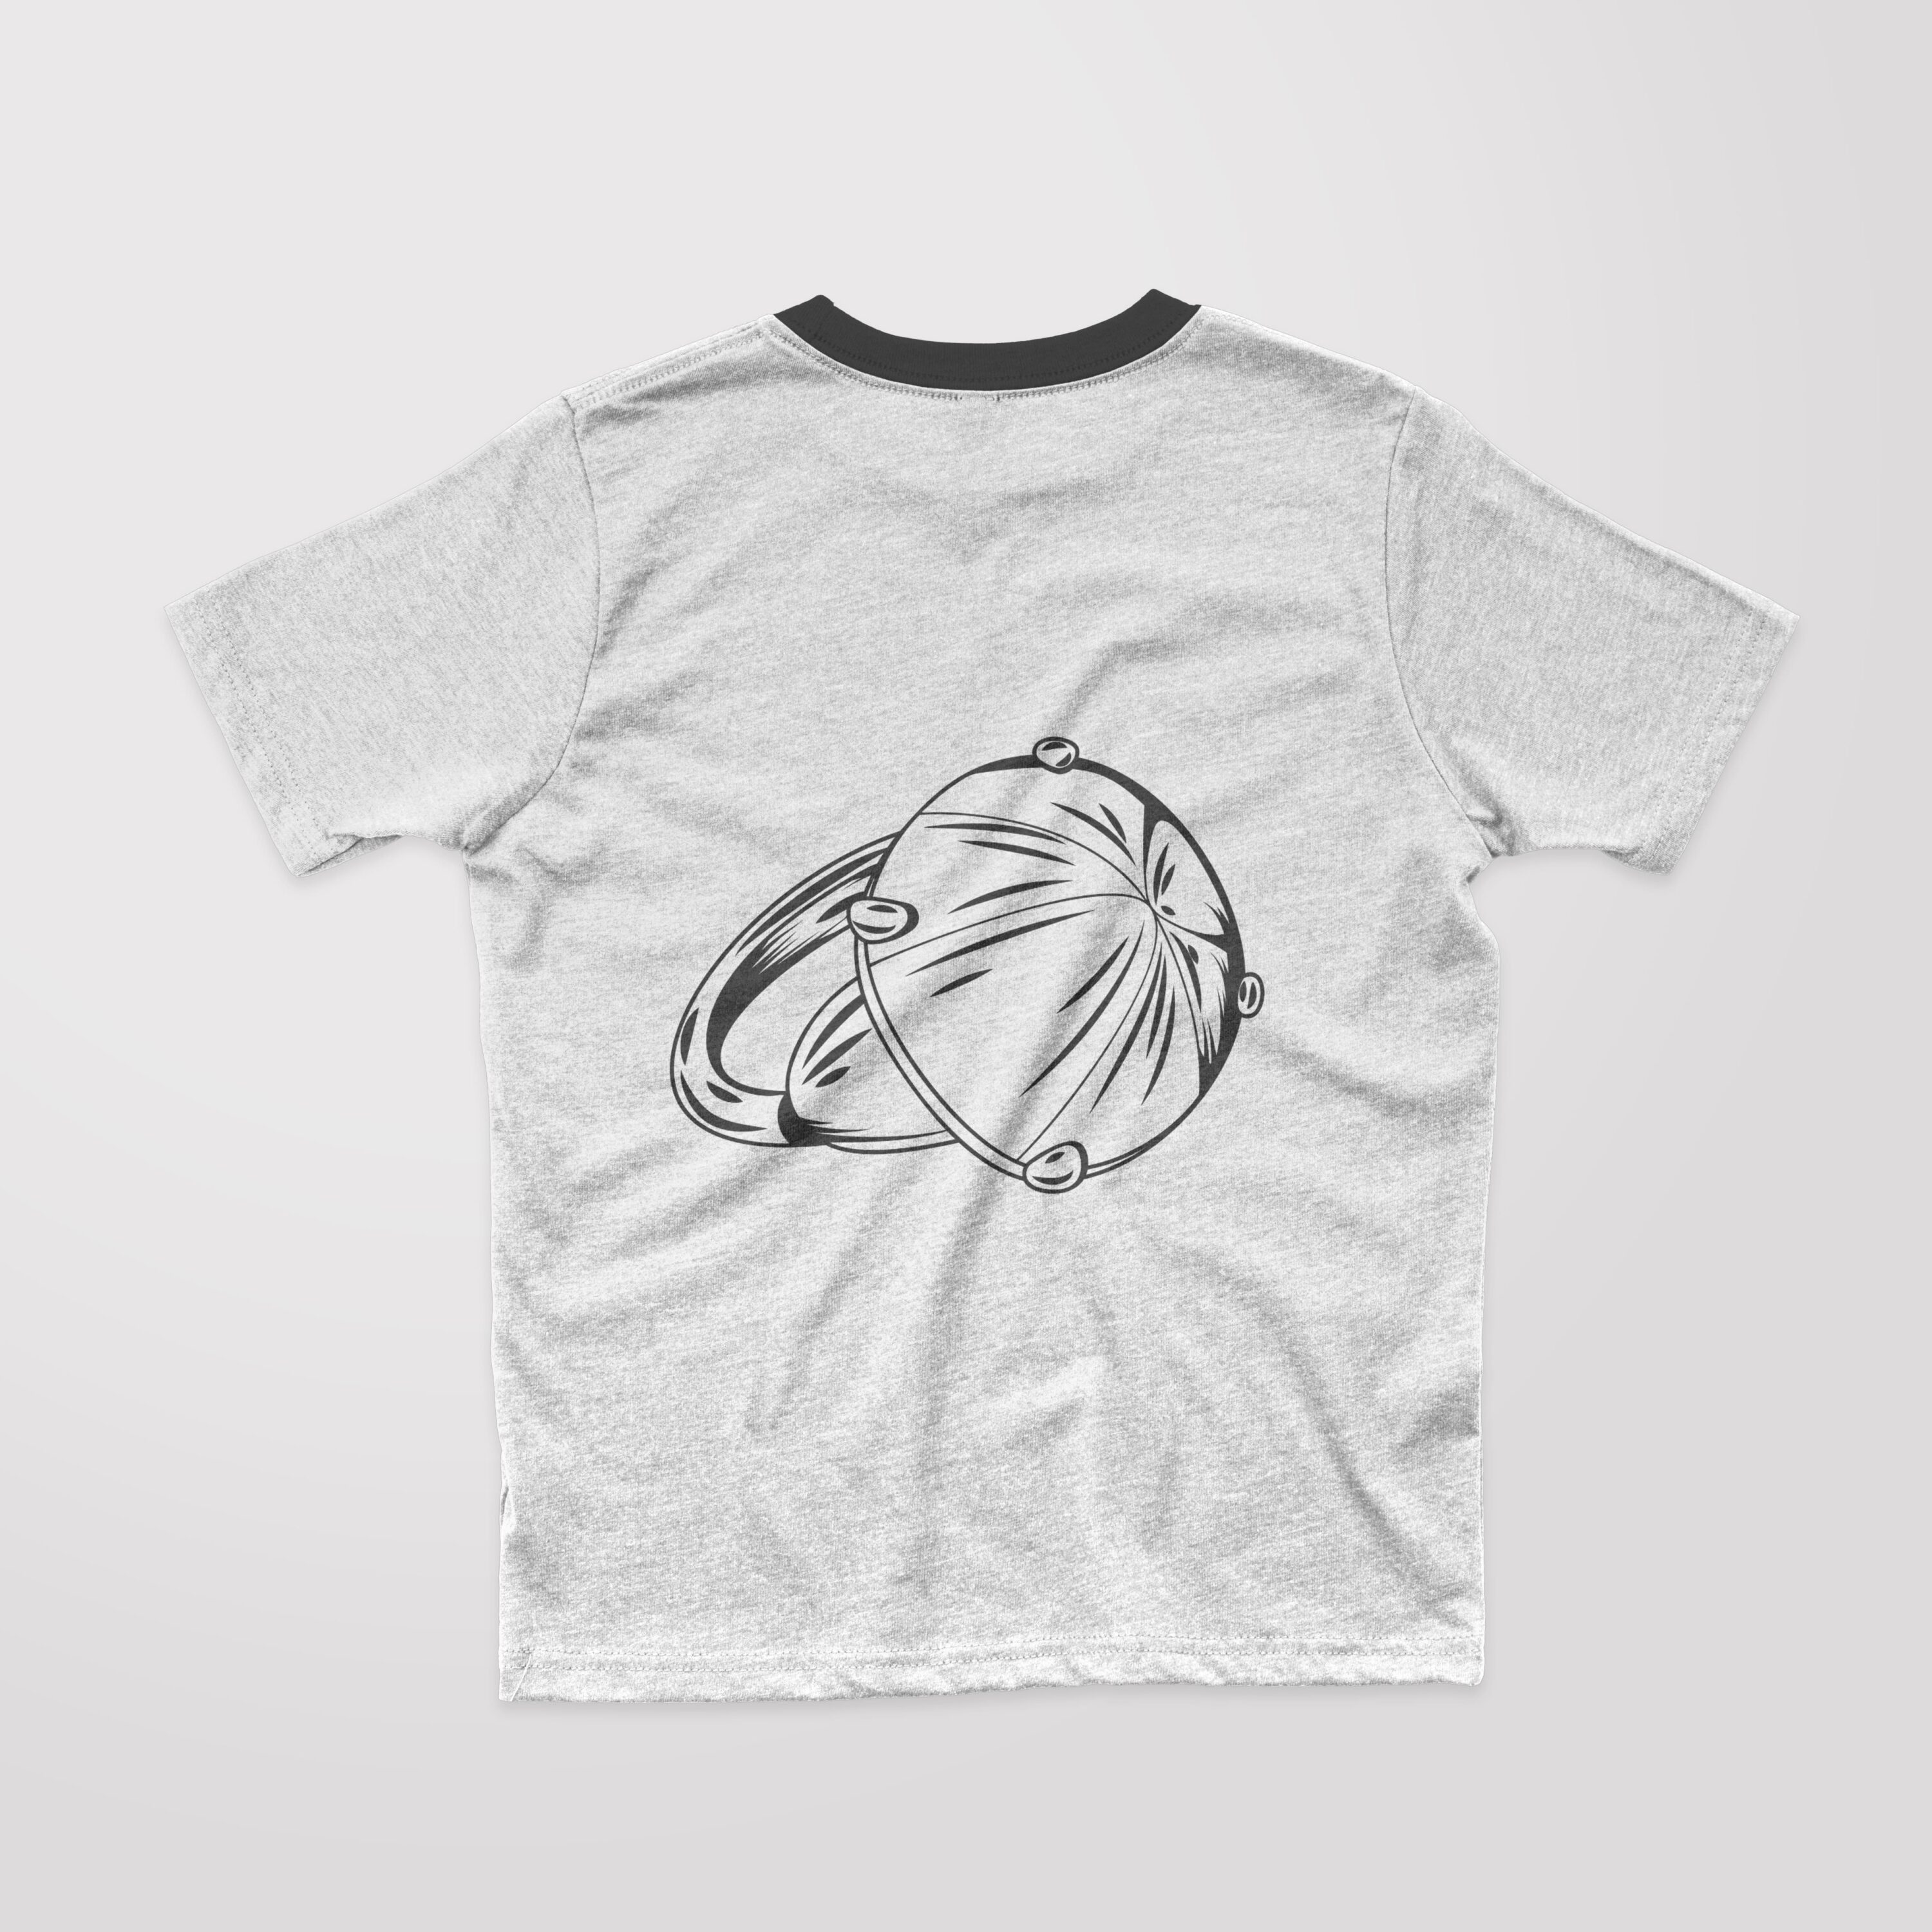 Image of a T-shirt with an irresistible outline diamond ring print.